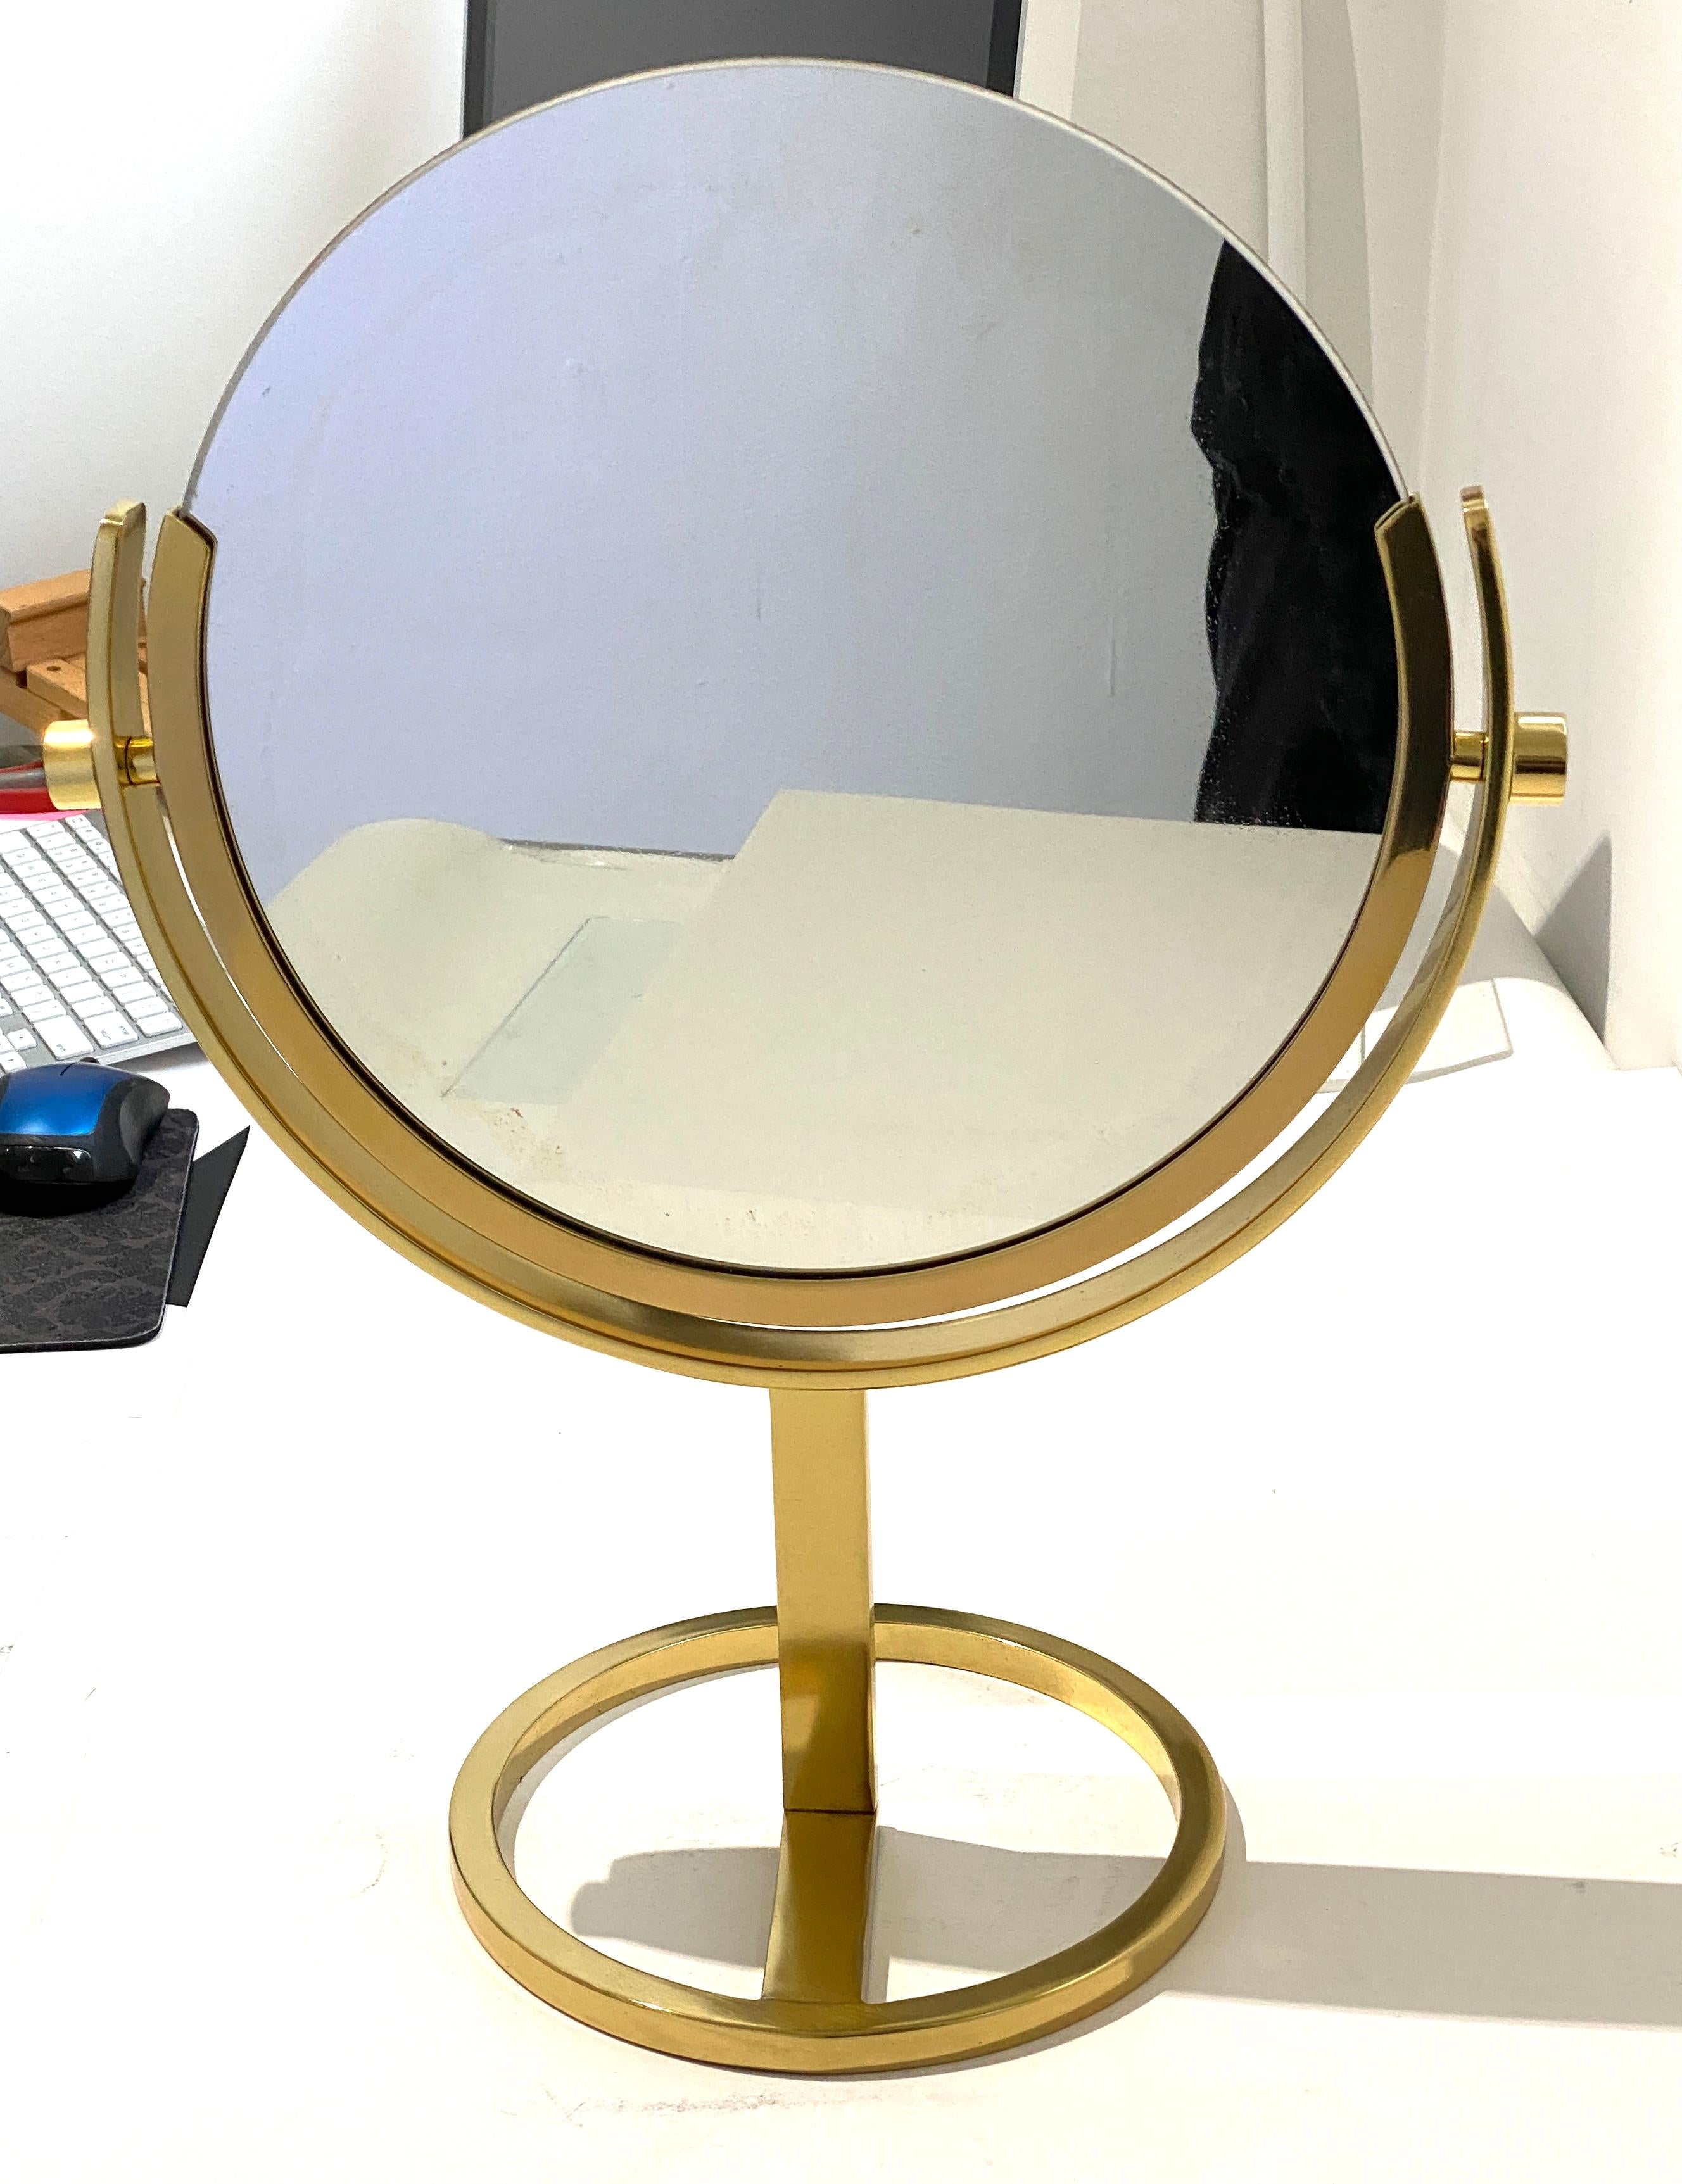 This stylish and chic double sided vanity table mirror dates to the 1970s and was created by Charles Hollis Jones. 

Note: The piece has been professionally polished and lacquered (so no tarnishing).

Note: The mirror does not have any magnification